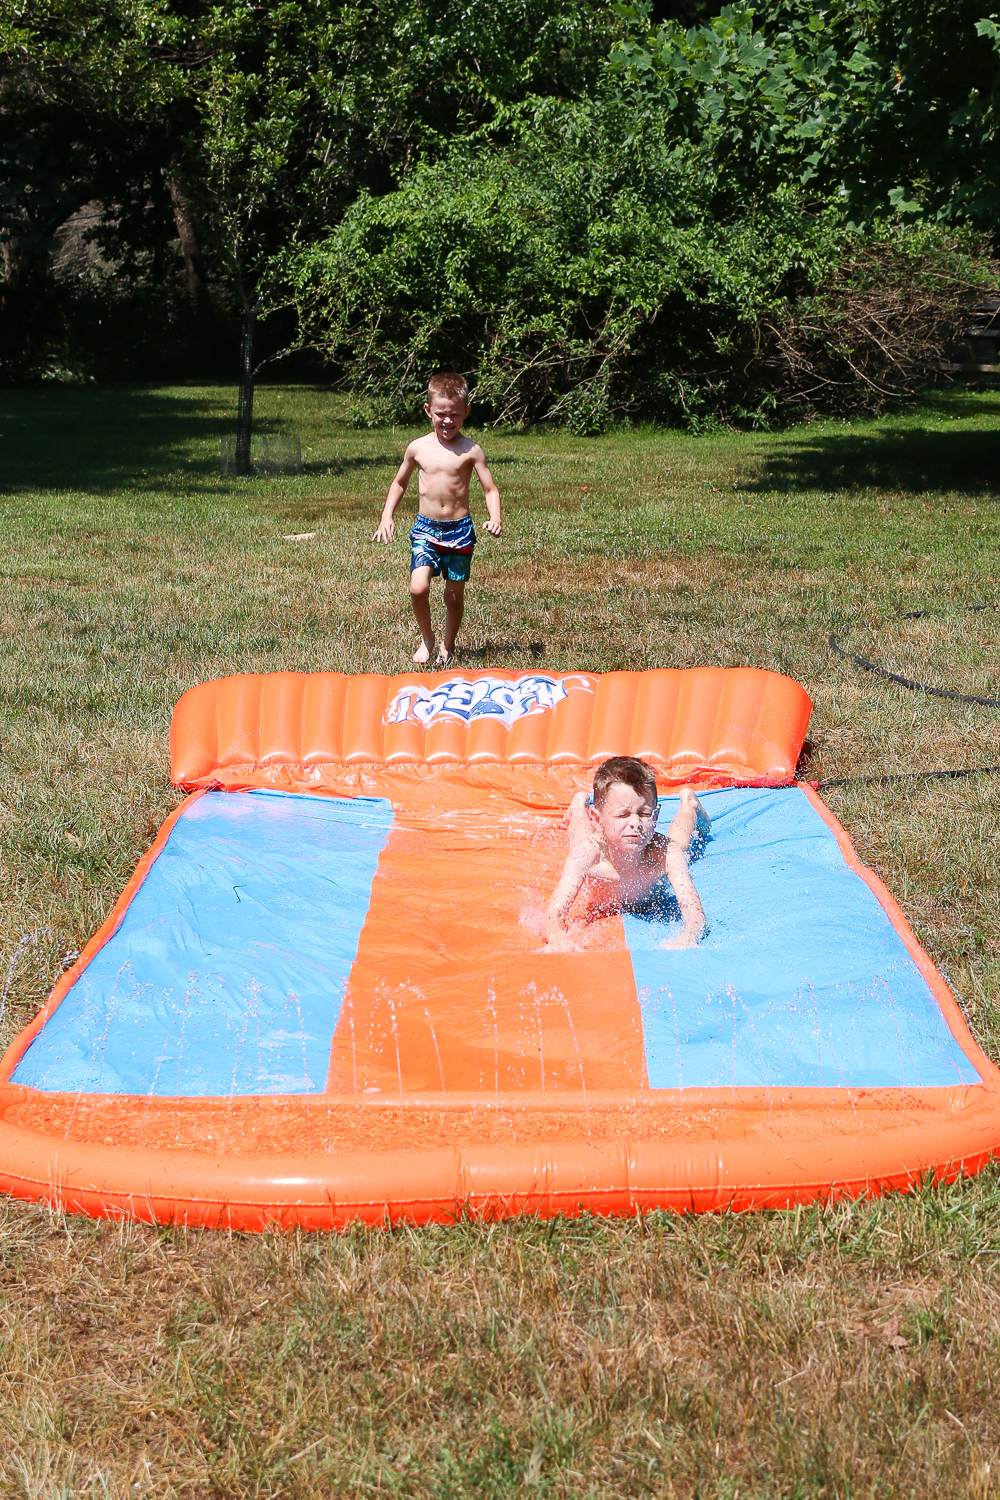 Two boys playing outside on a plastic slip and slide/ splash pad